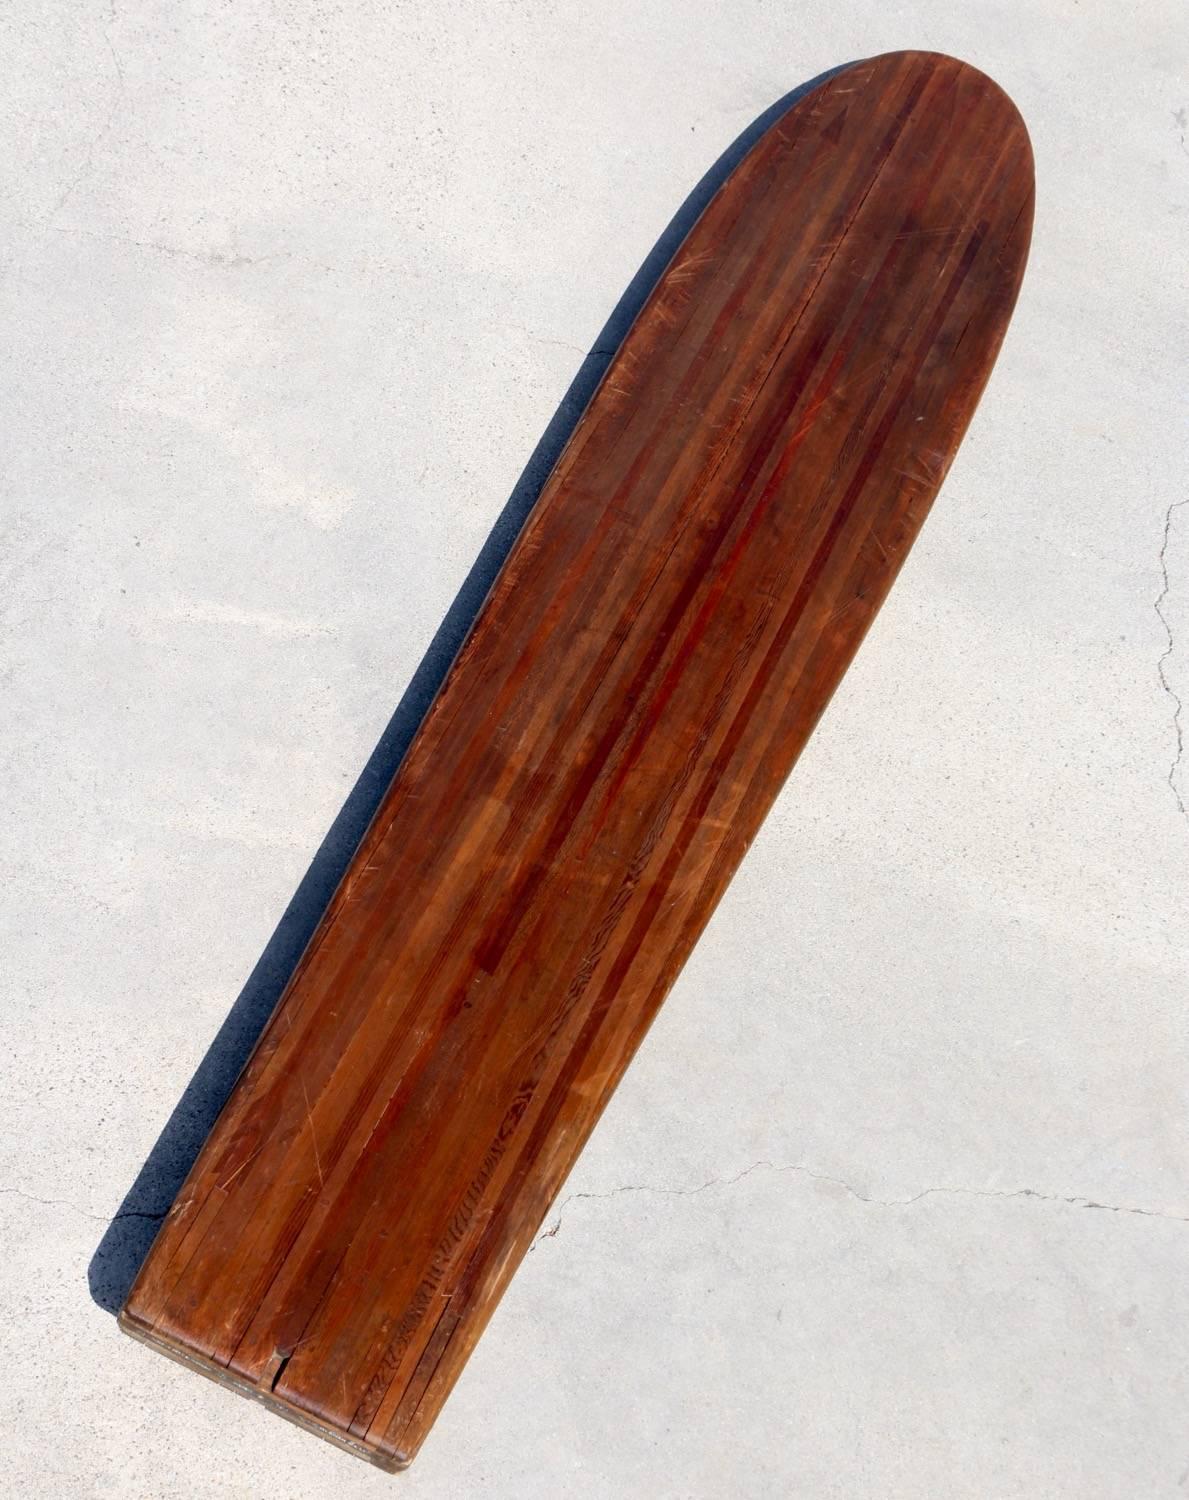 Antique wood surfboard, 1935, all original, made in Los Angeles. This board is an exceptional beauty. Solid wood strips displaying the natural patina and original finish are masterfully held together with dowels. A variety of woods with arrows in a